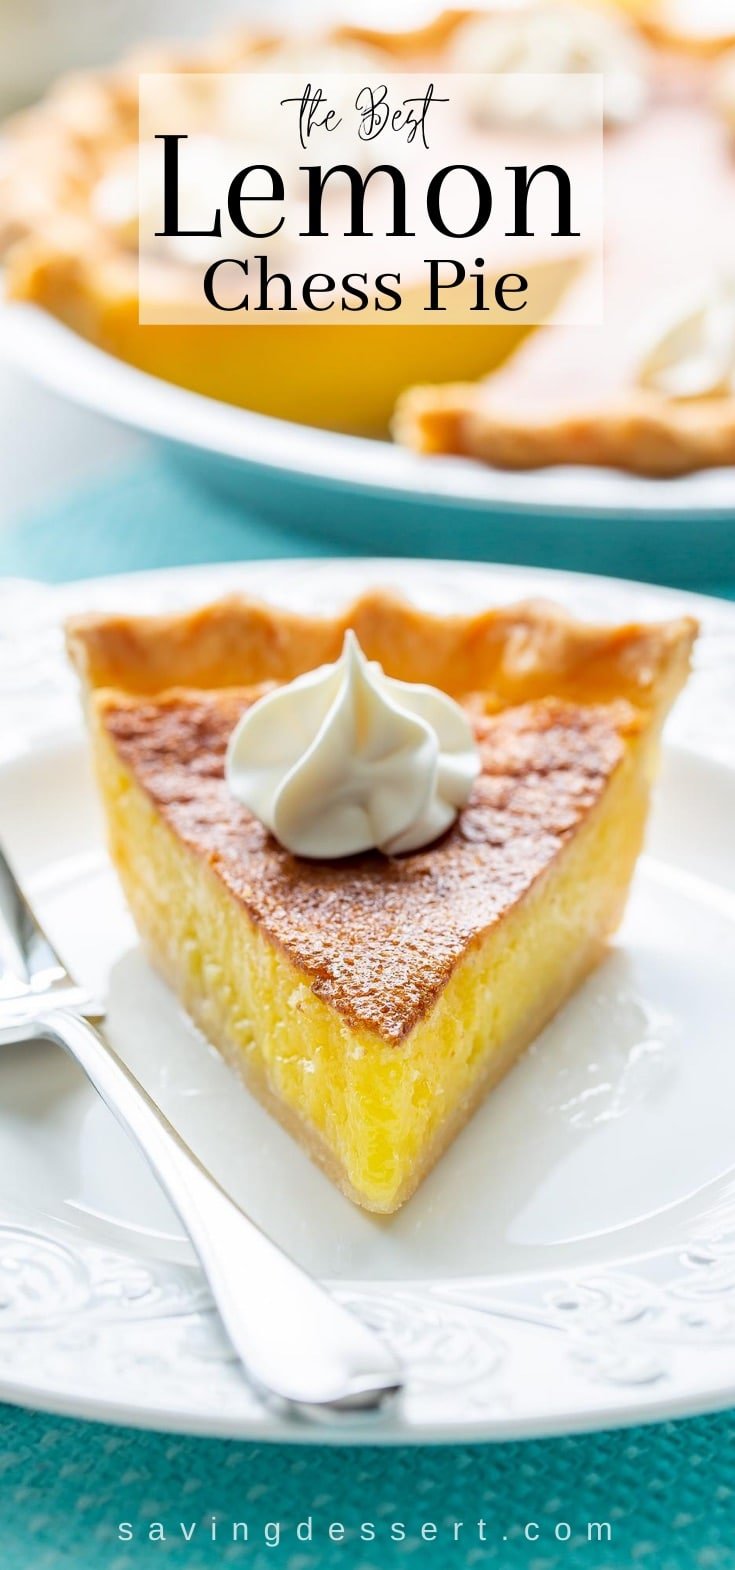 A slice of lemon chess pie on a plate topped with a swirl of whipped cream